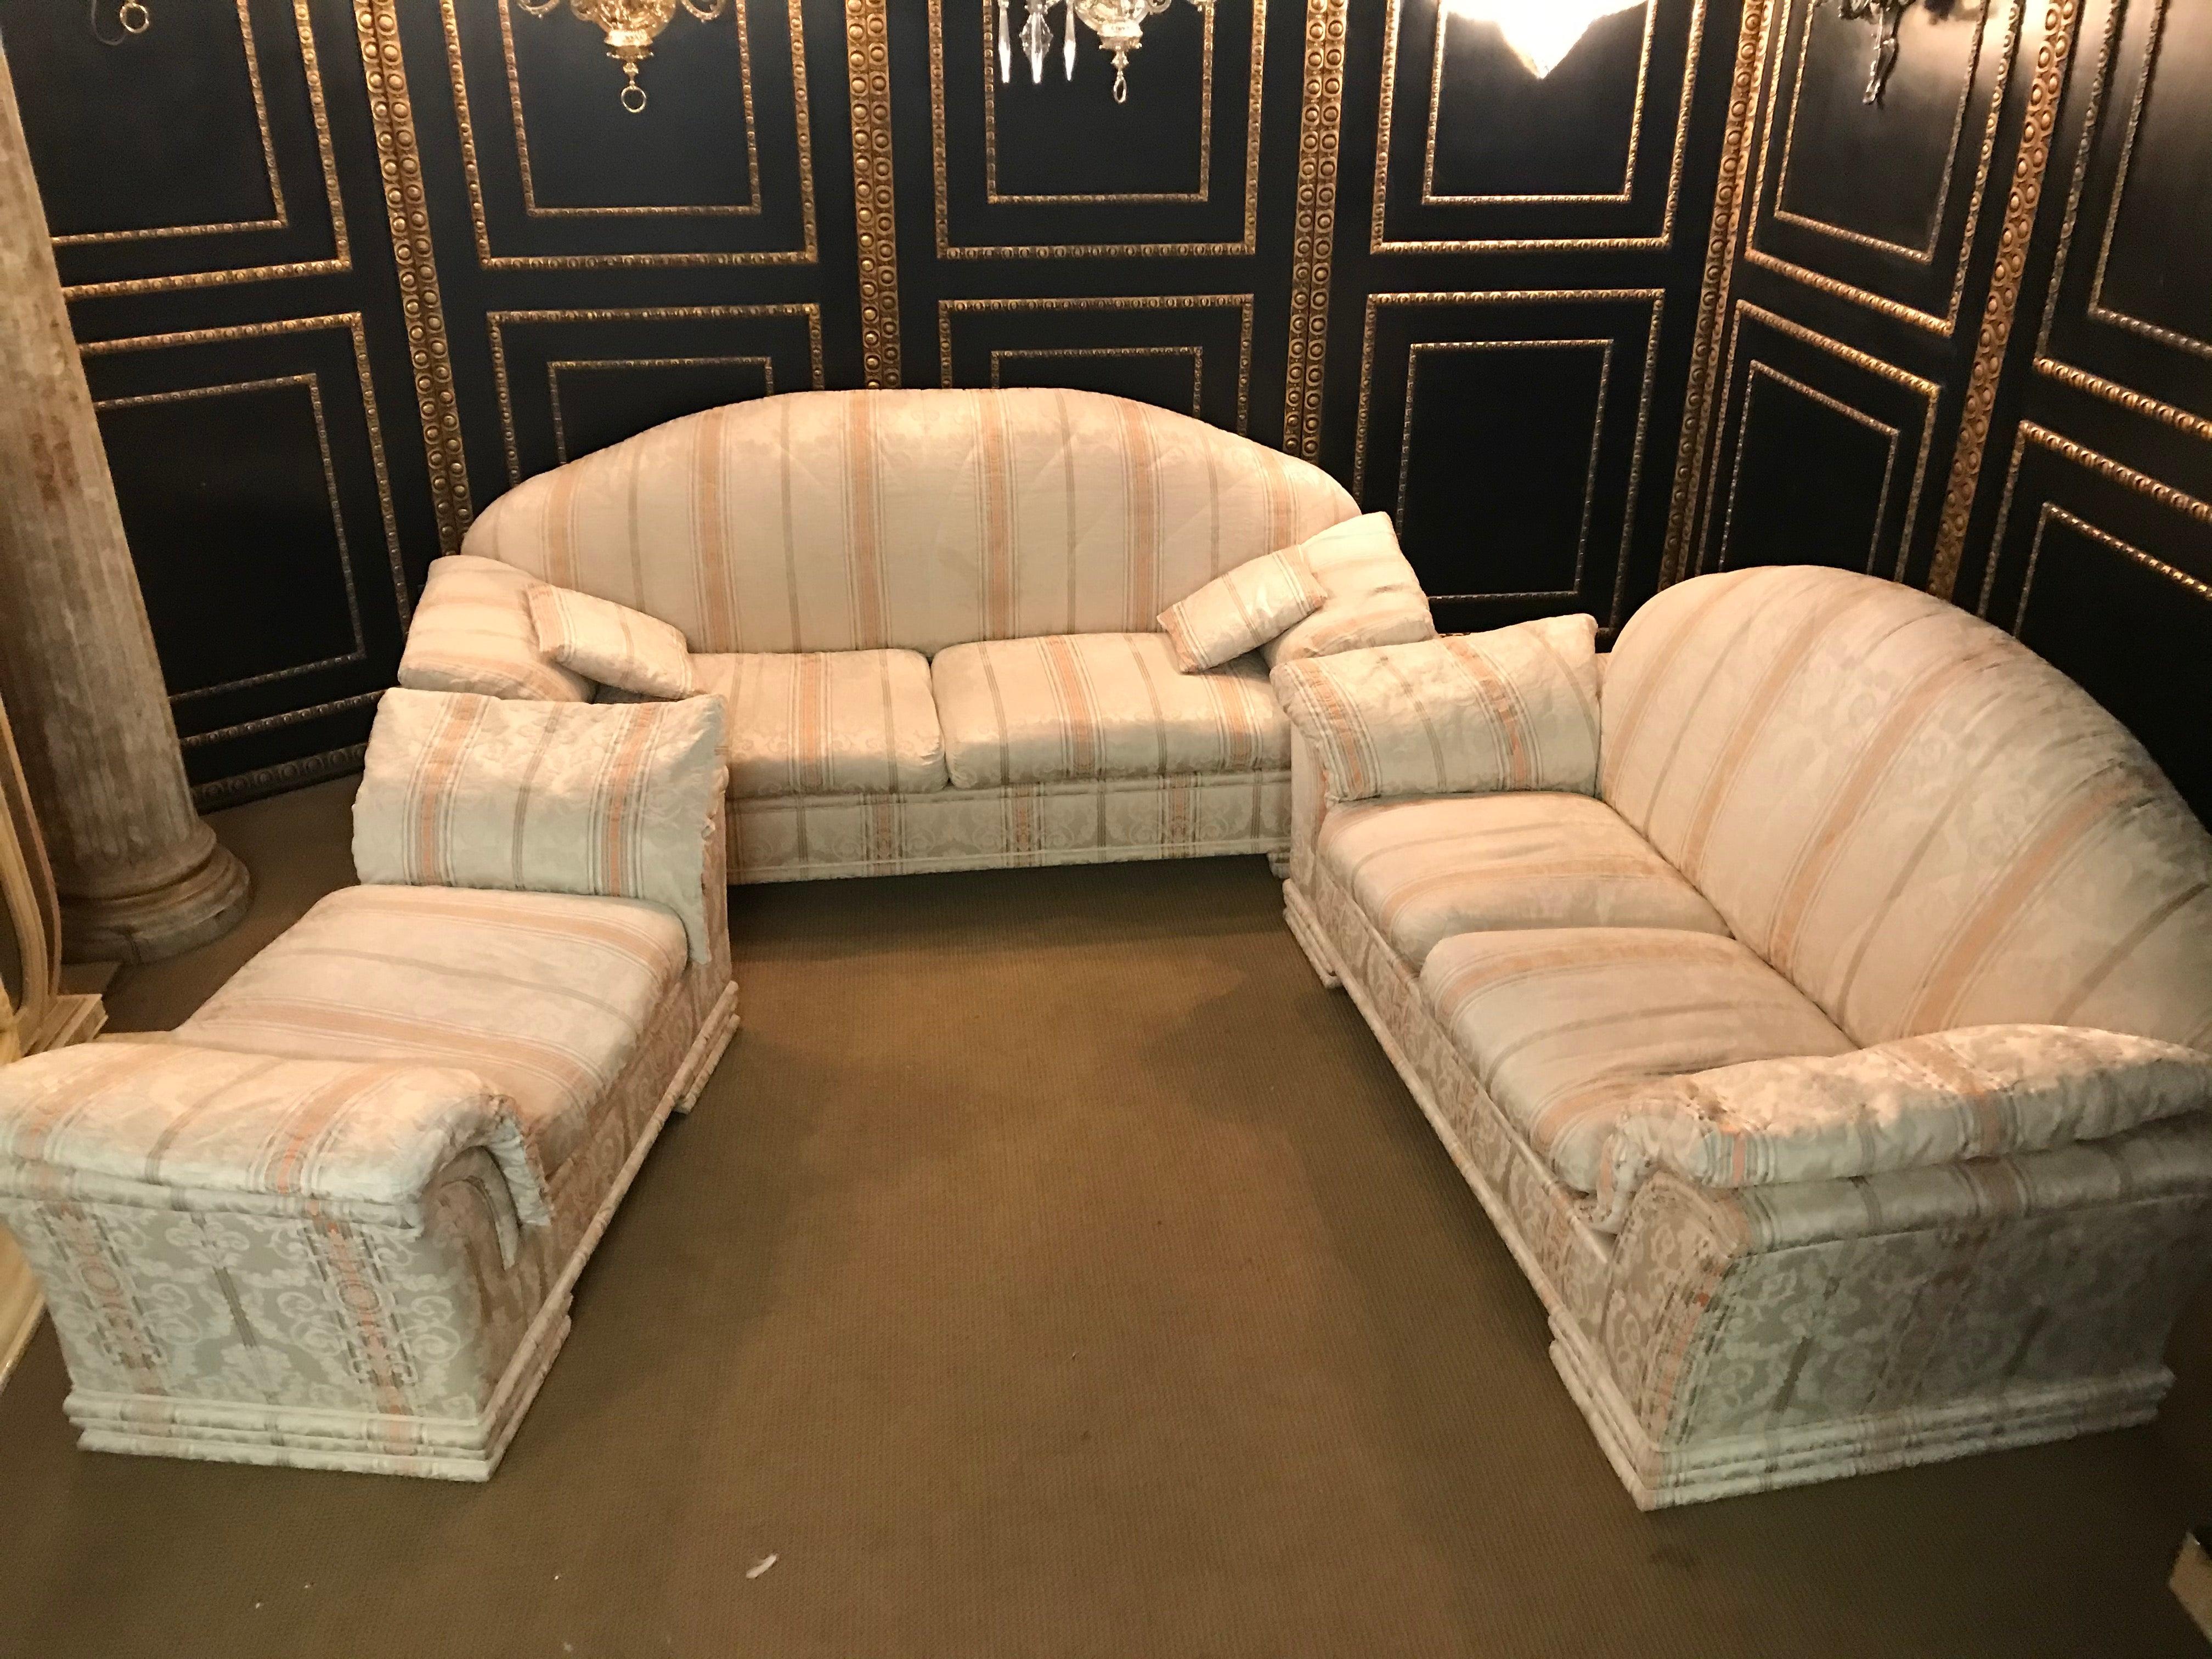 Very high-quality couch set from the Bielefelder Werkstätten, The Bielefelder Werkstätten are a manufacturer in the Classic style. Every single one of the products has been carefully crafted by hand by masters in their field. Timeless Classic